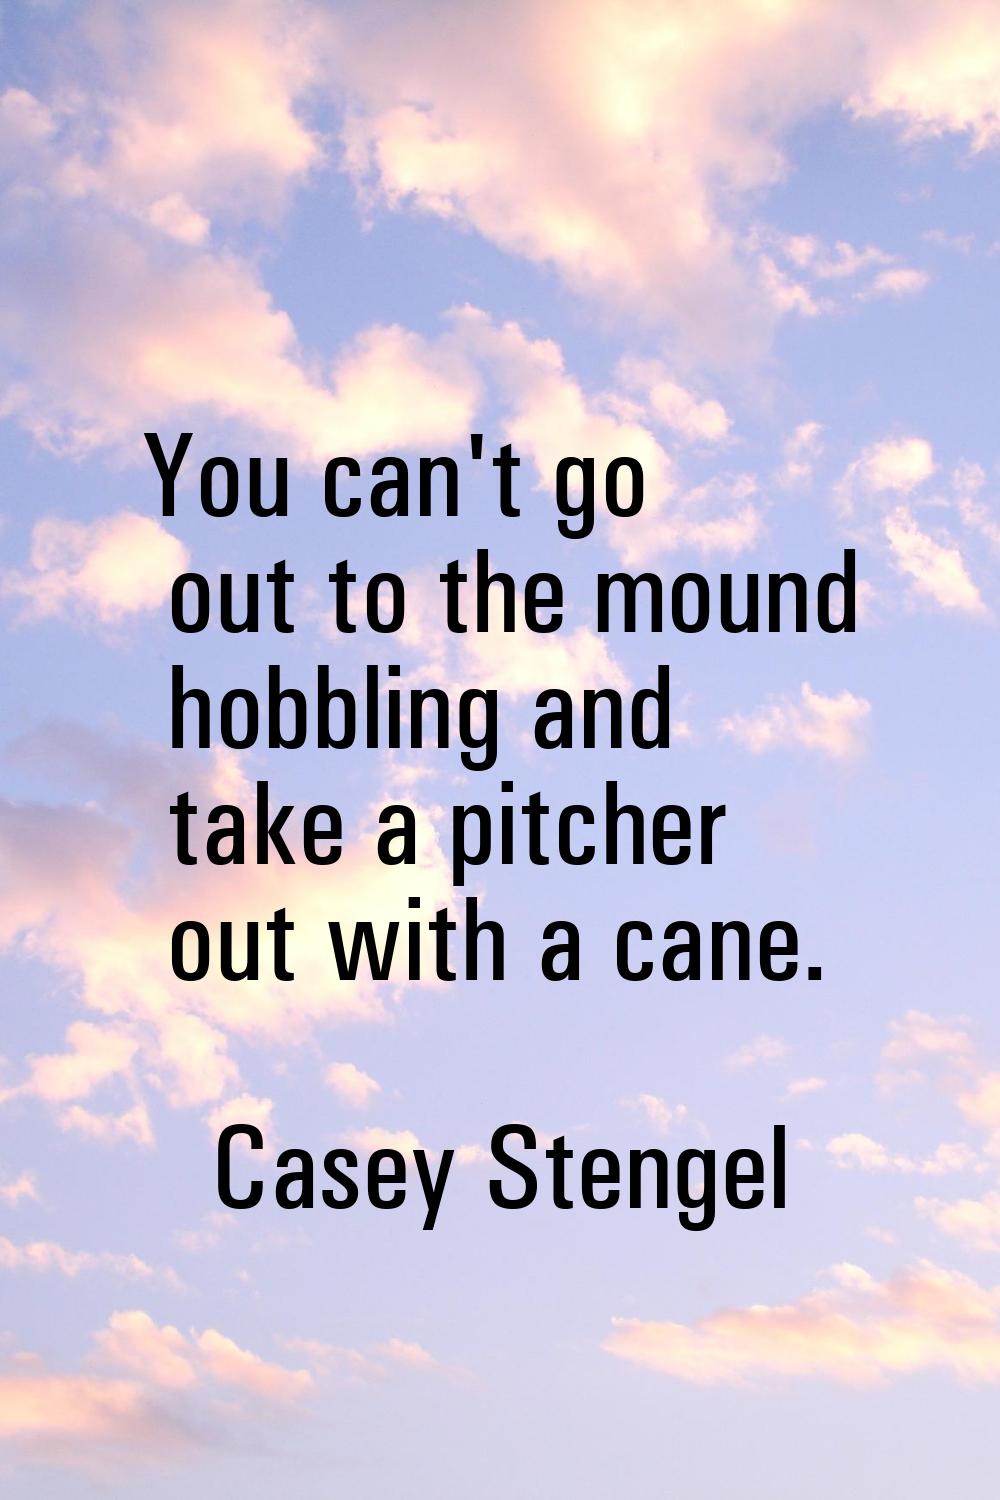 You can't go out to the mound hobbling and take a pitcher out with a cane.